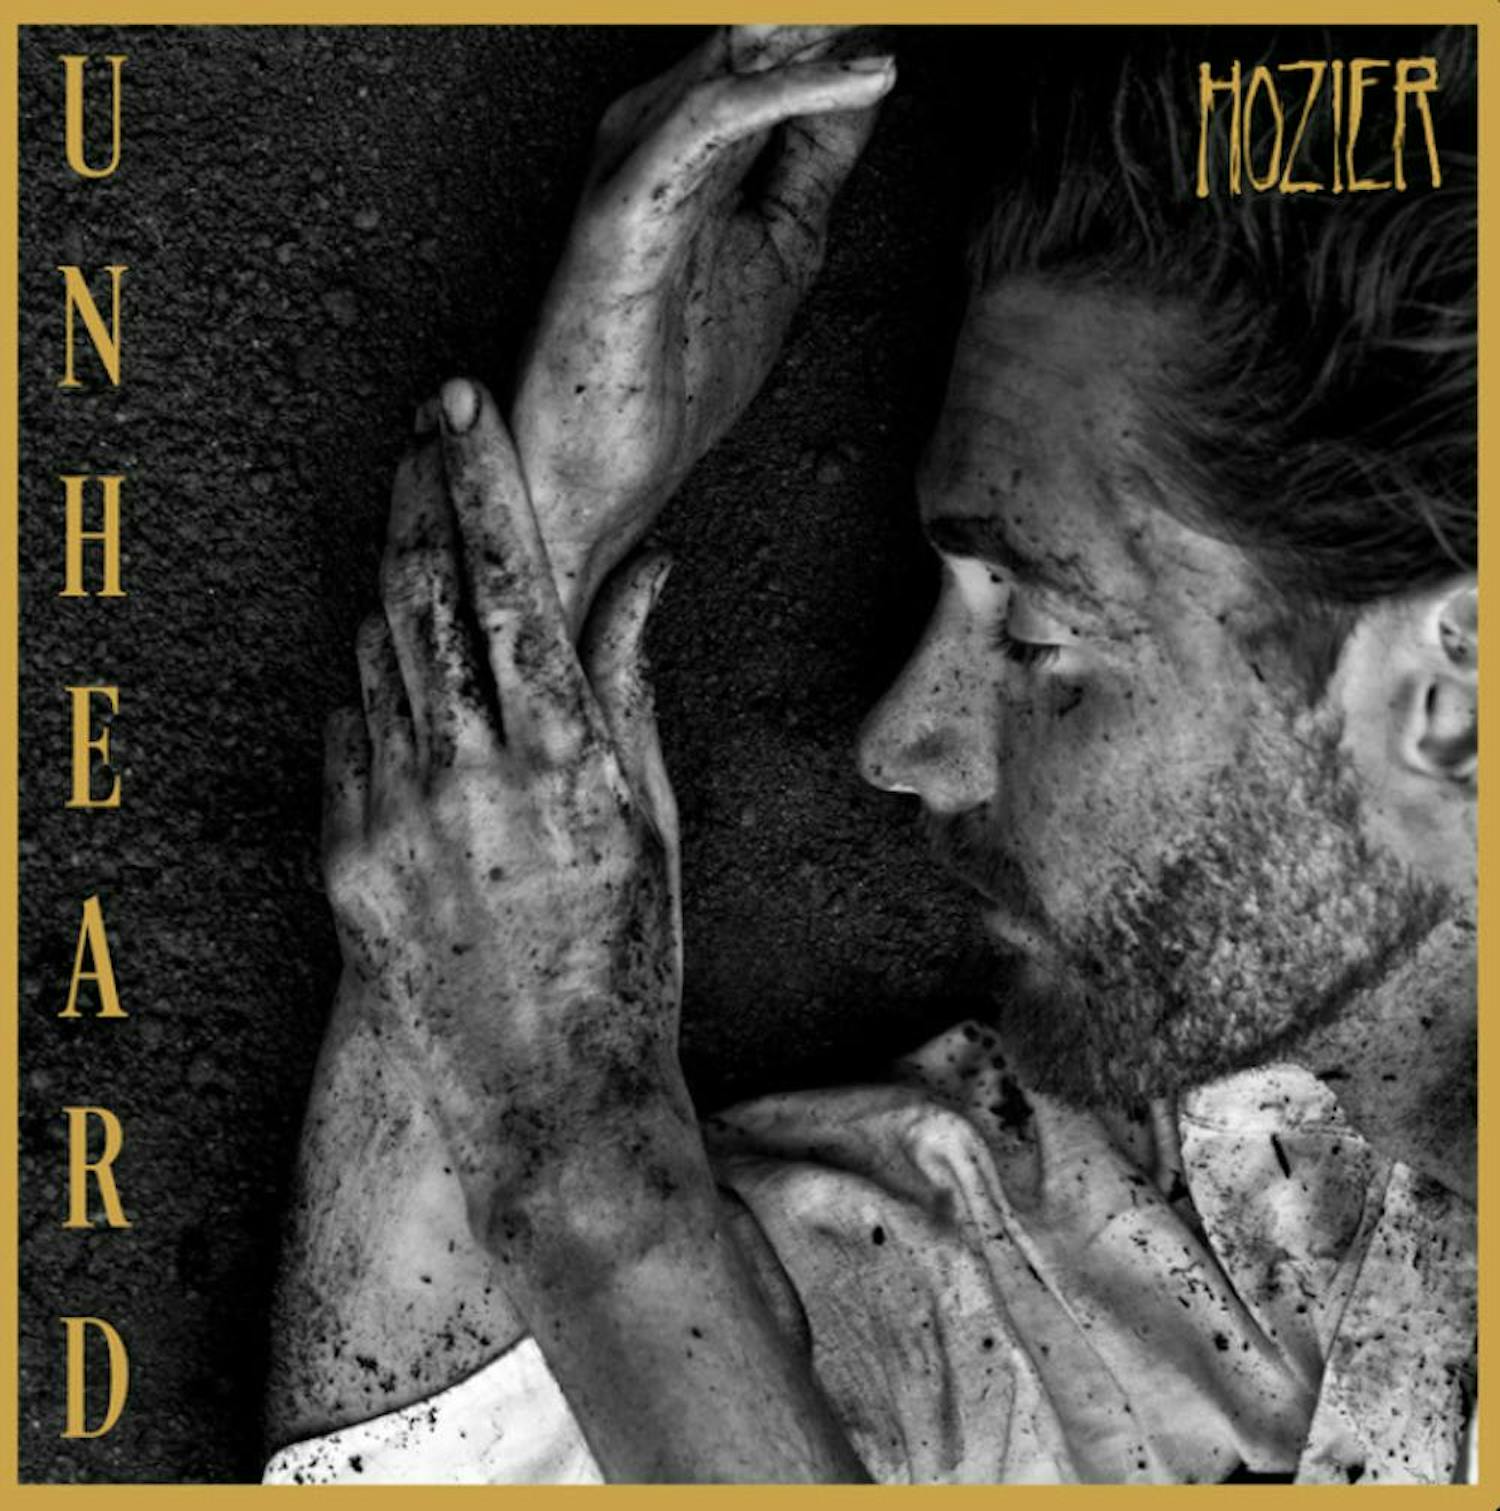 Hozier's latest project "Unheard" tackles themes of hell.